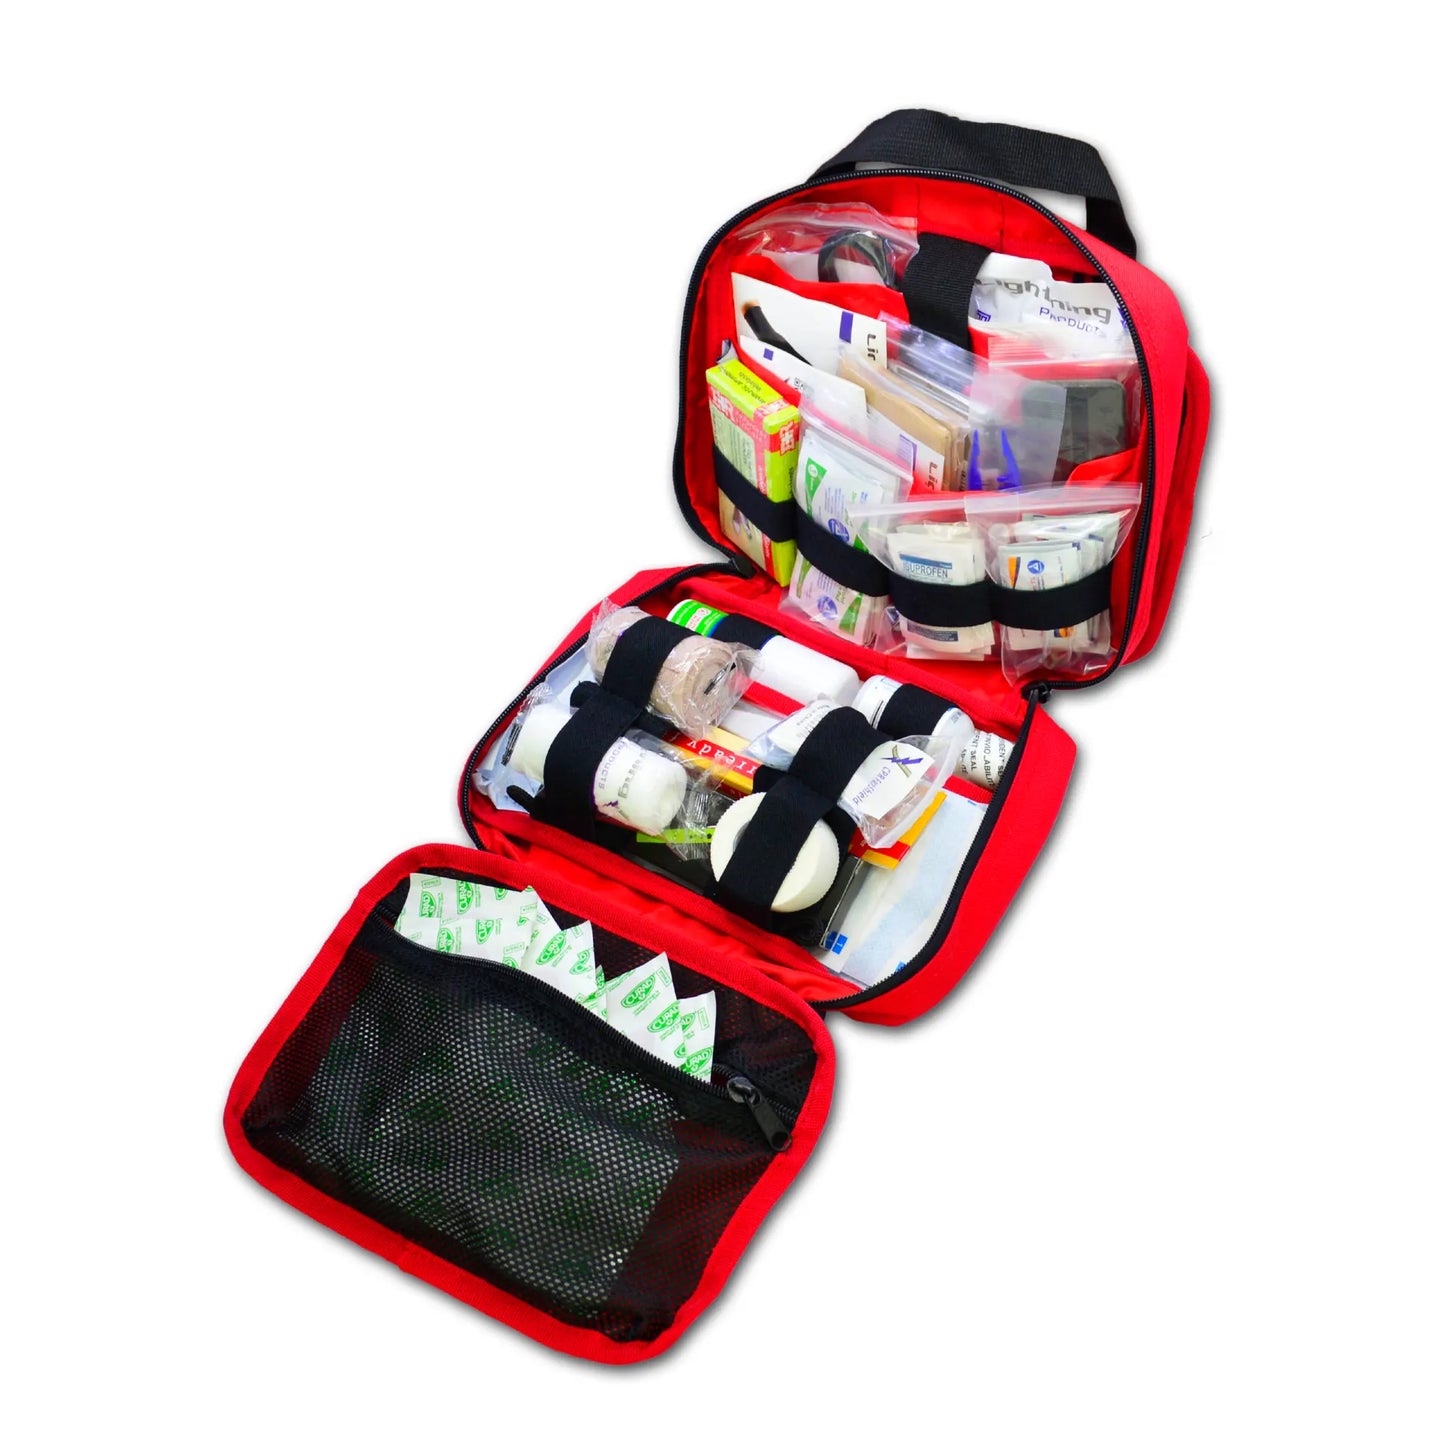 Premium Rip-Away Individual First Aid Kit for Vehicle Head Rest